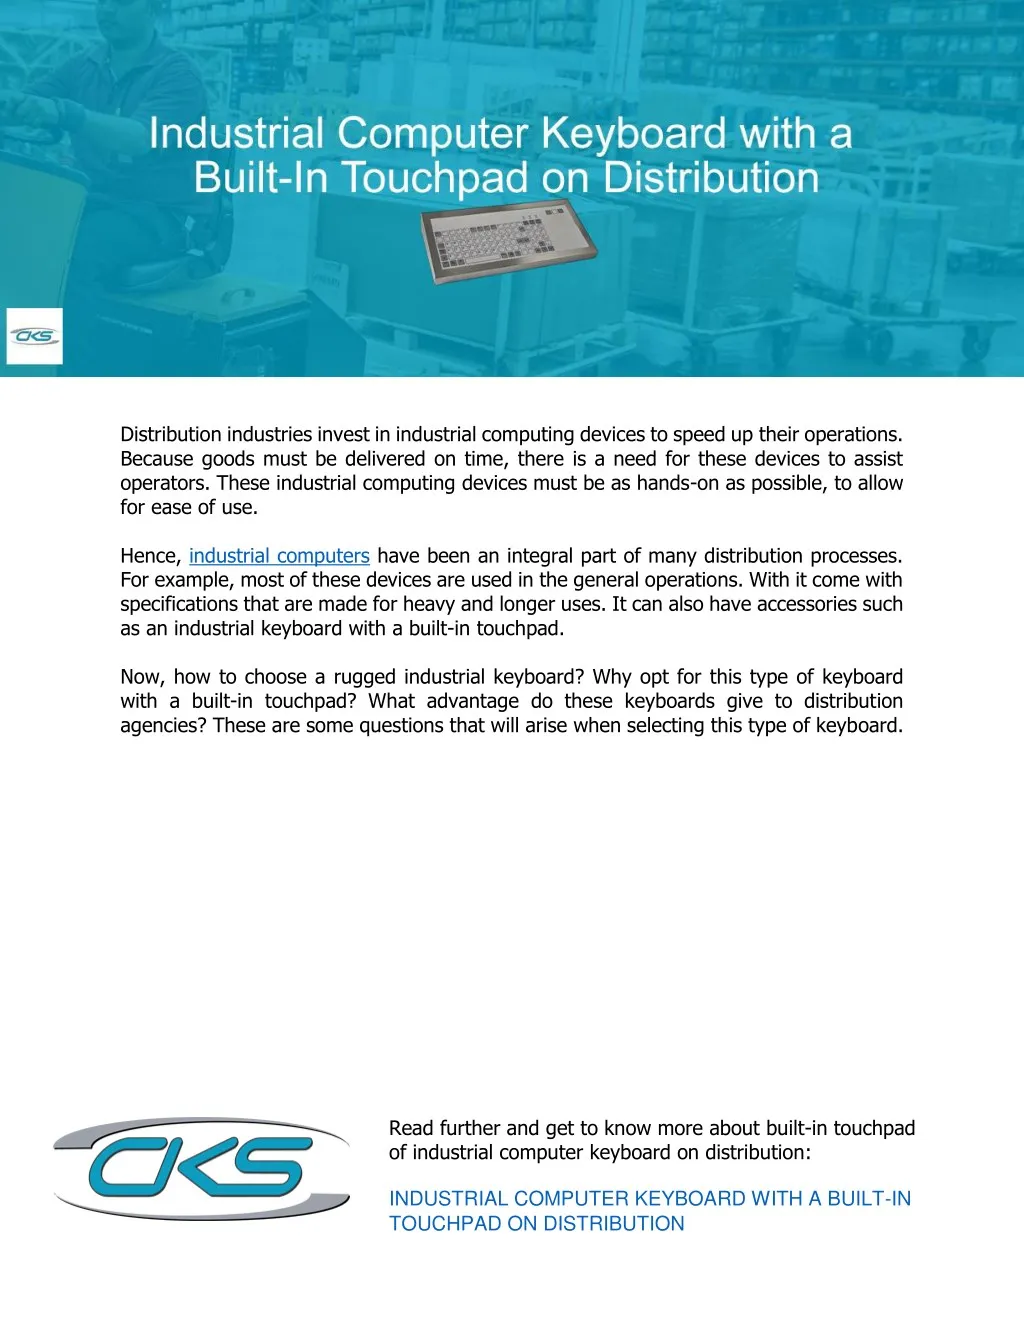 distribution industries invest in industrial